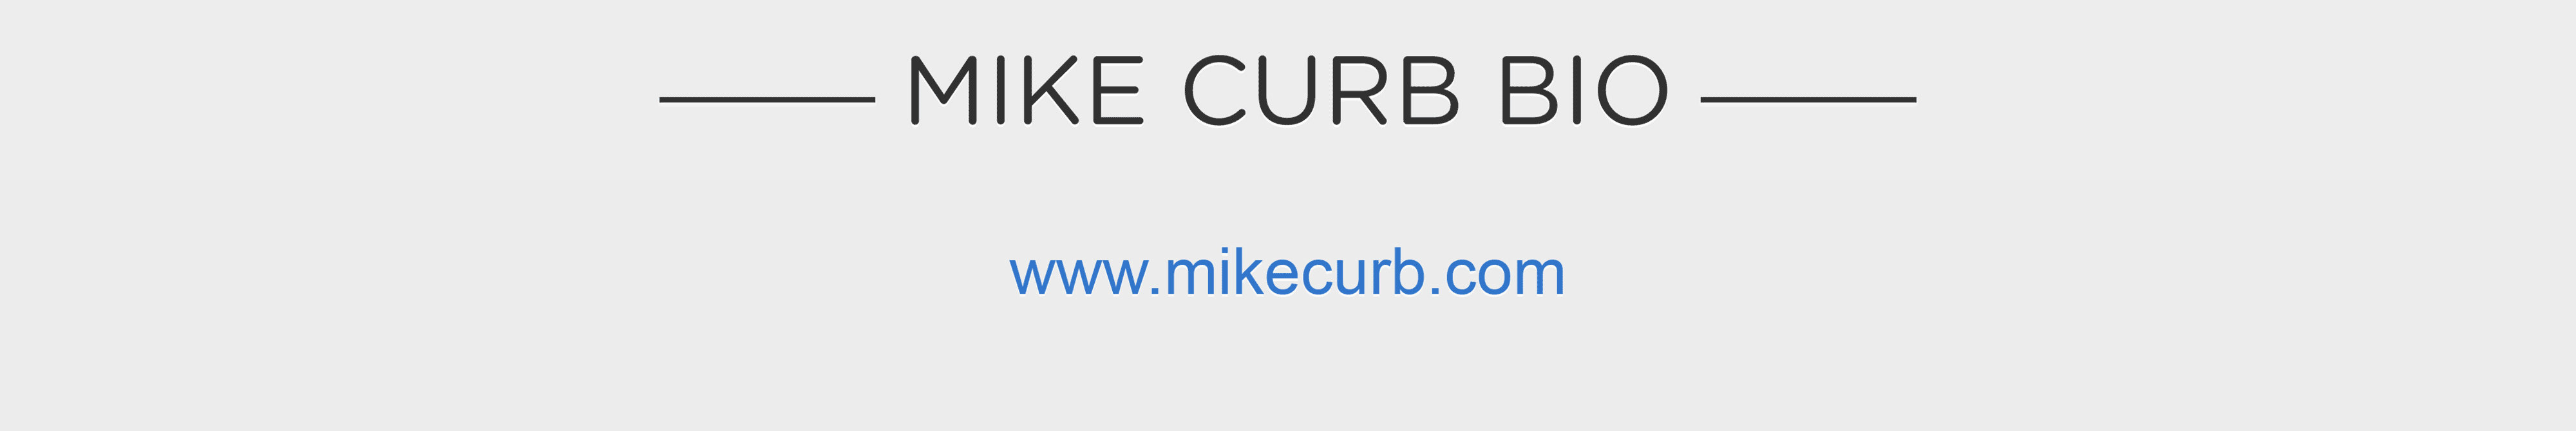 Mike Curb